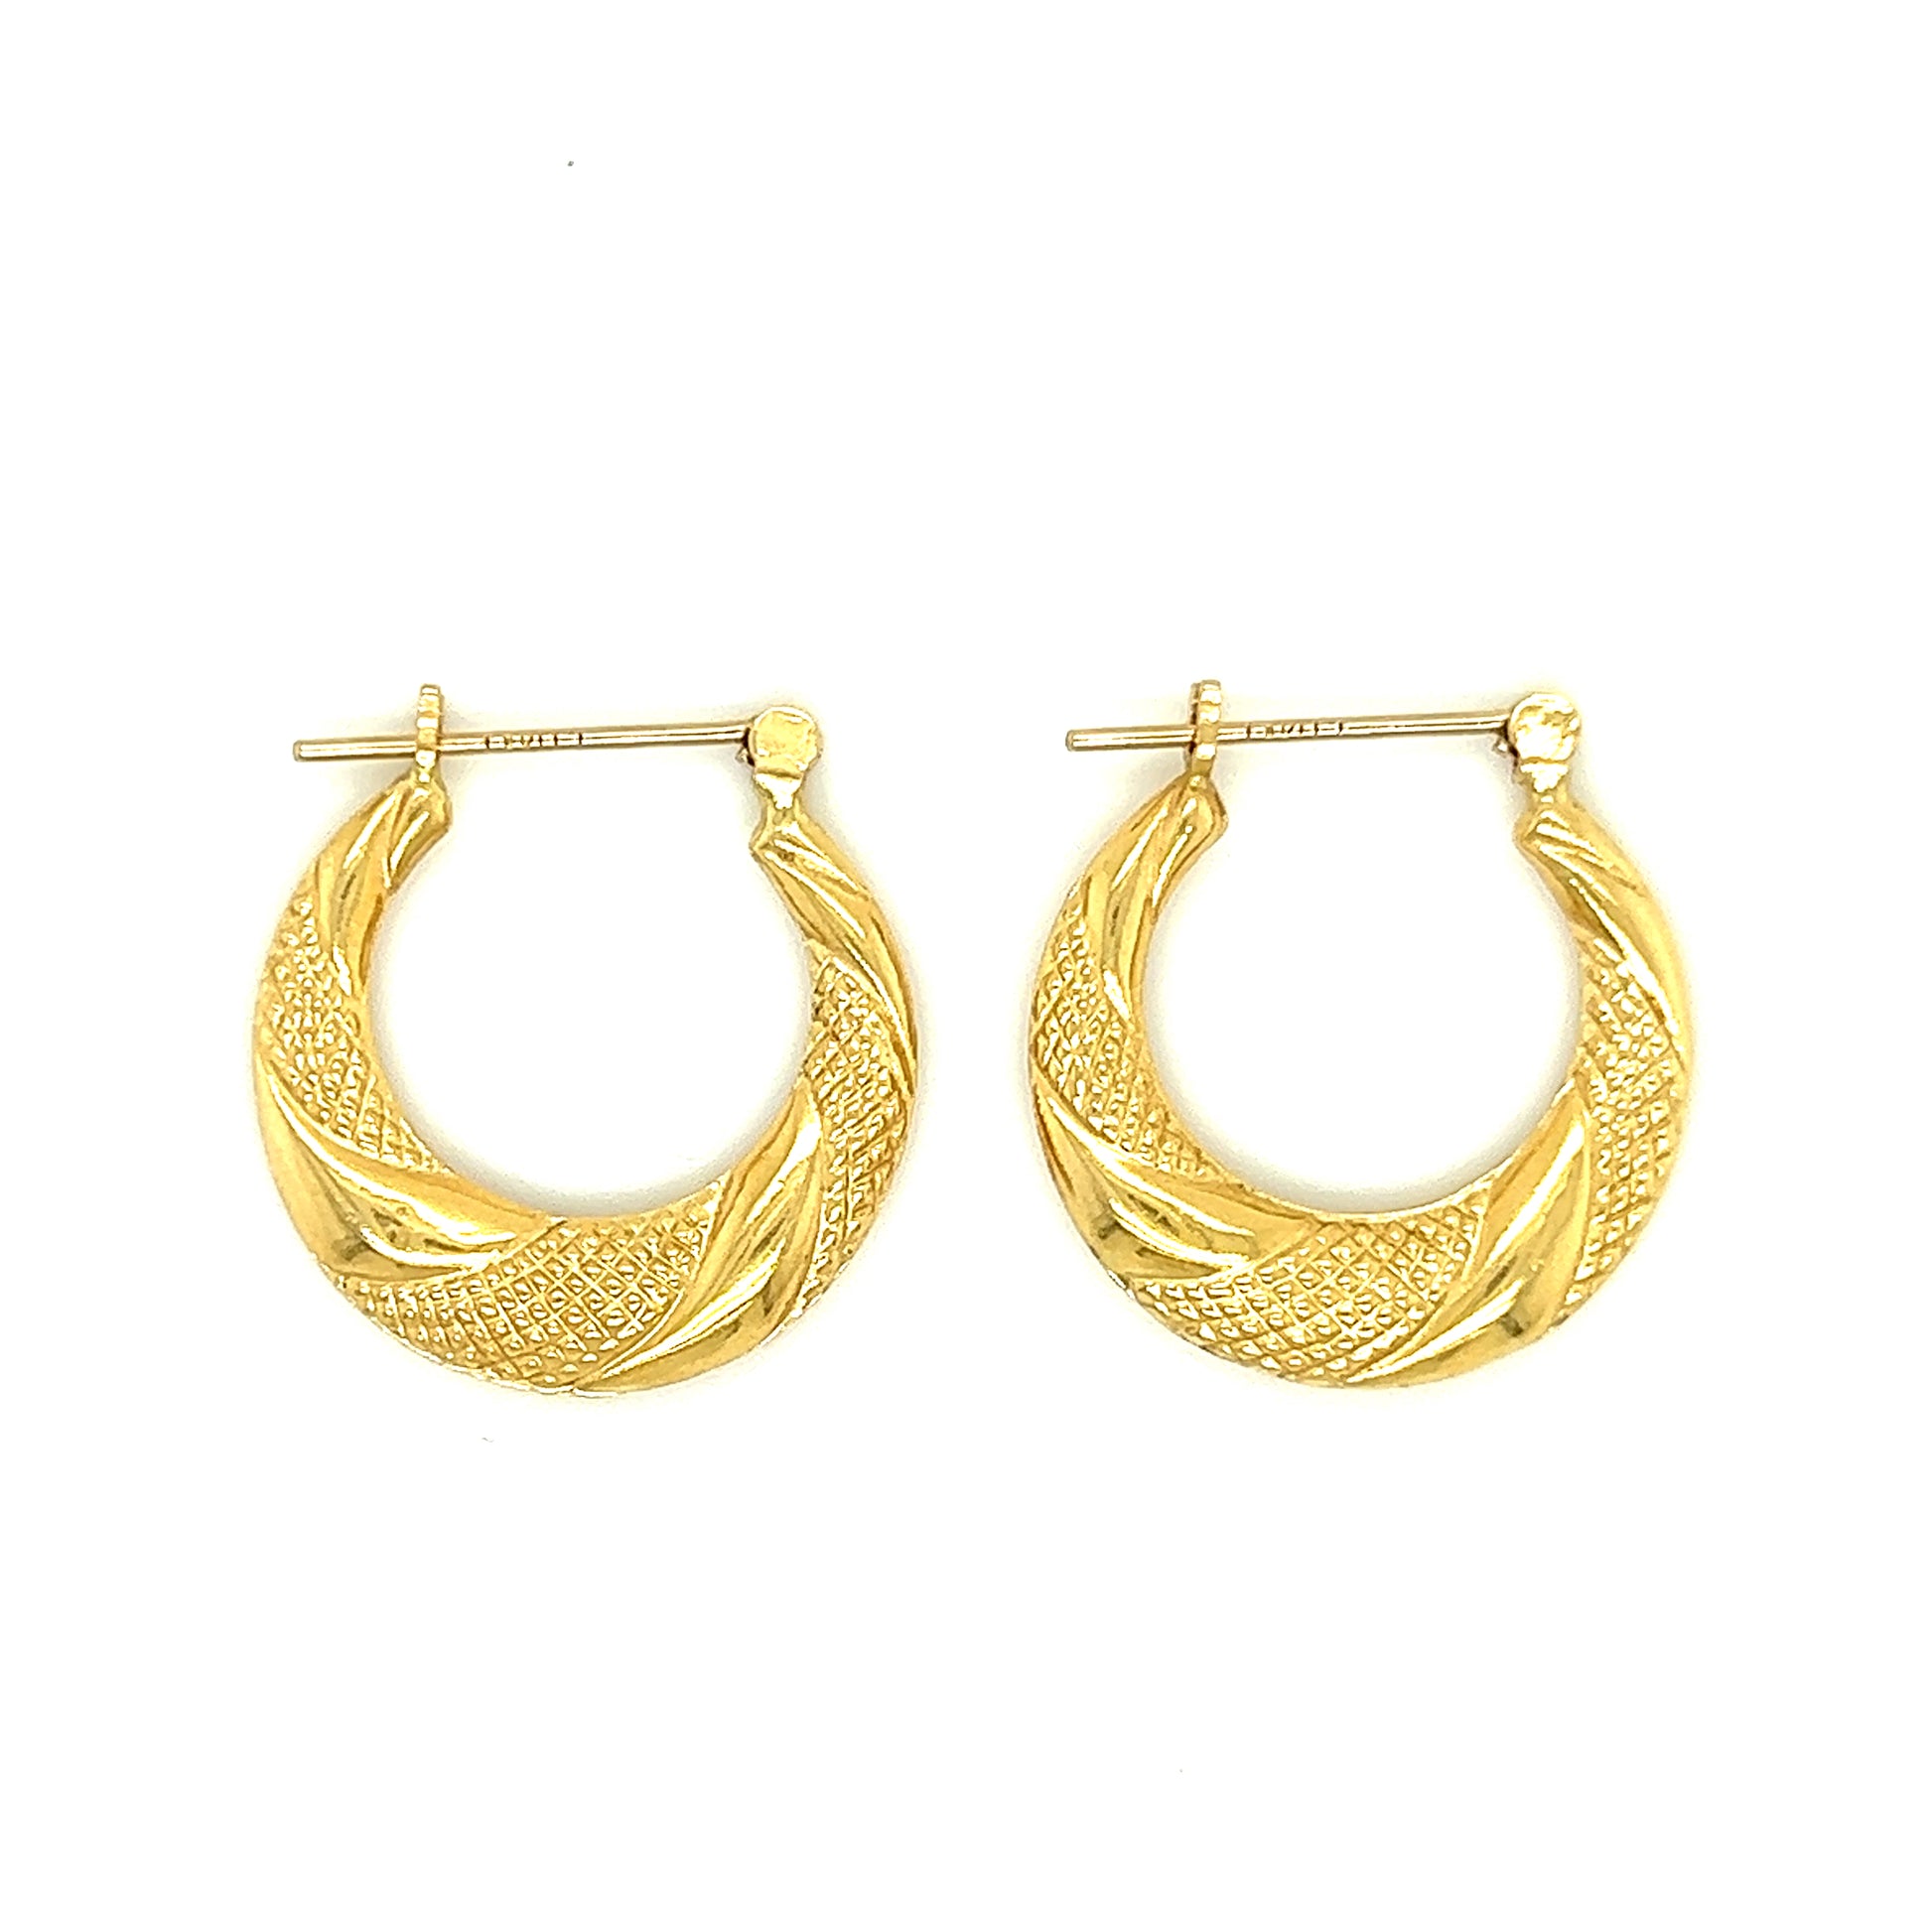 Copy of Hoop 20mm Earrings with Twisted Textured Pattern in 14K Yellow Gold Top View Closed Clasp